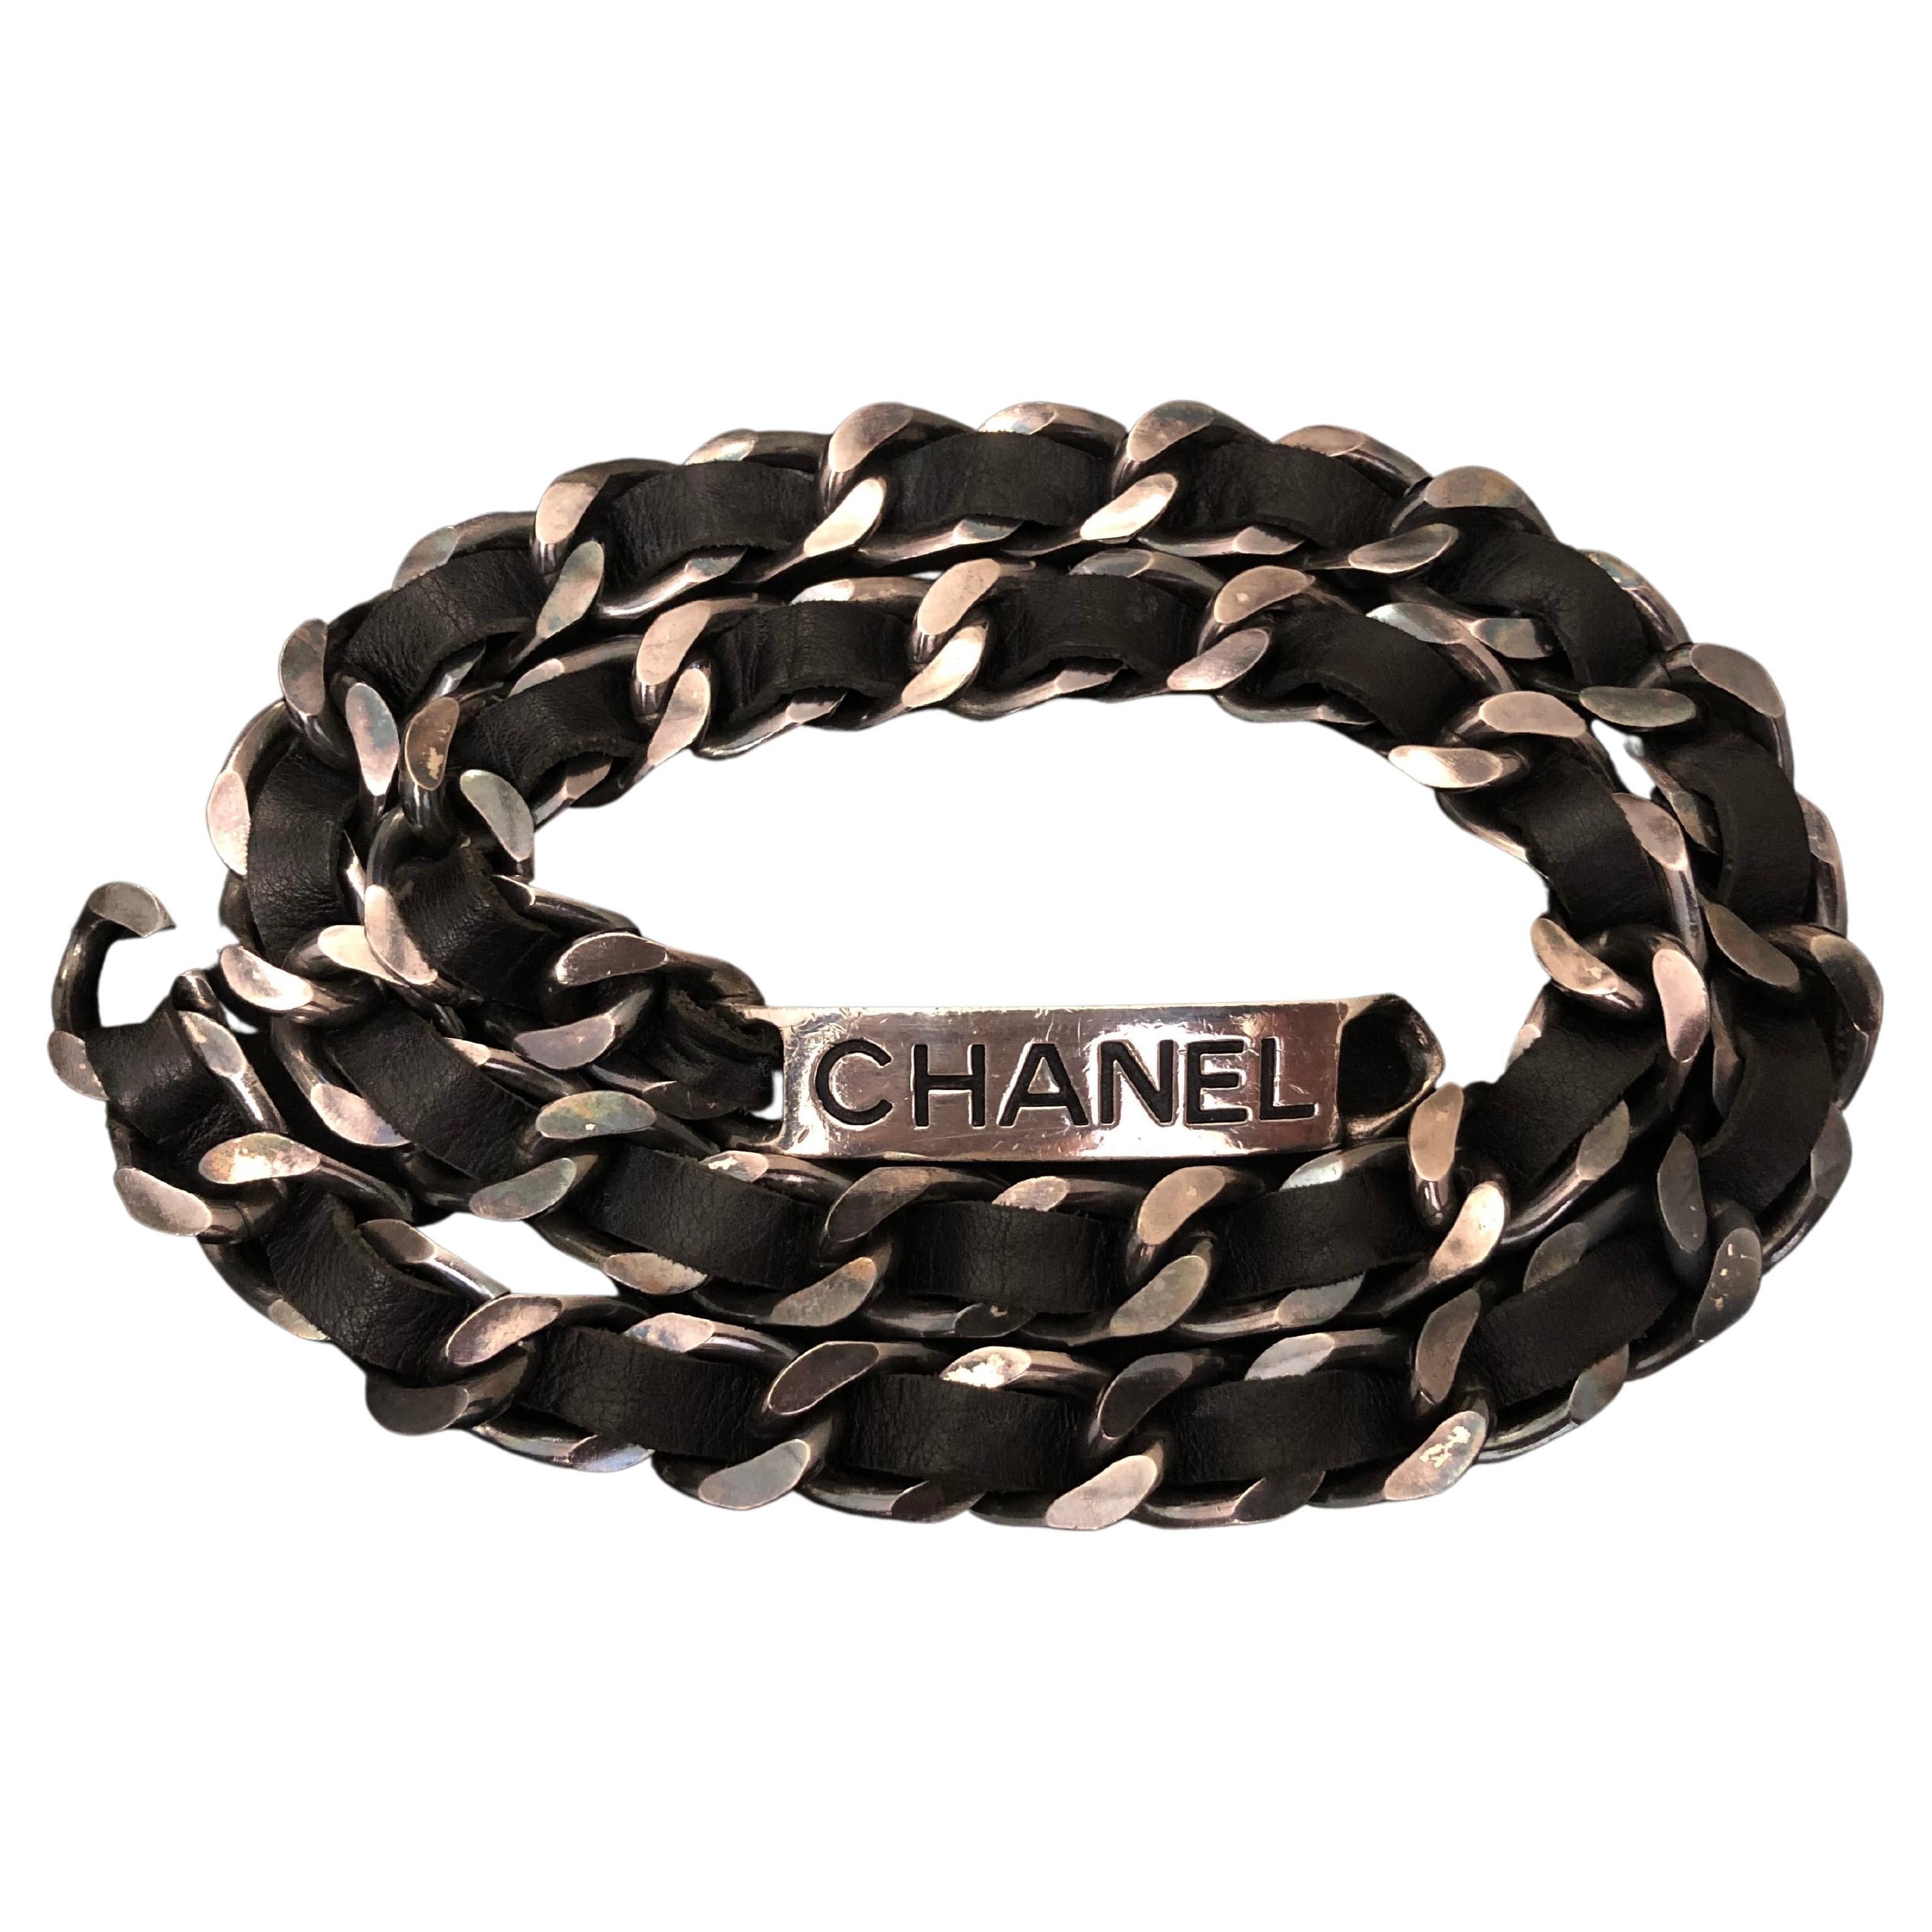 1995 Vintage CHANEL Silver Toned Black Leather Chain Belt Necklace